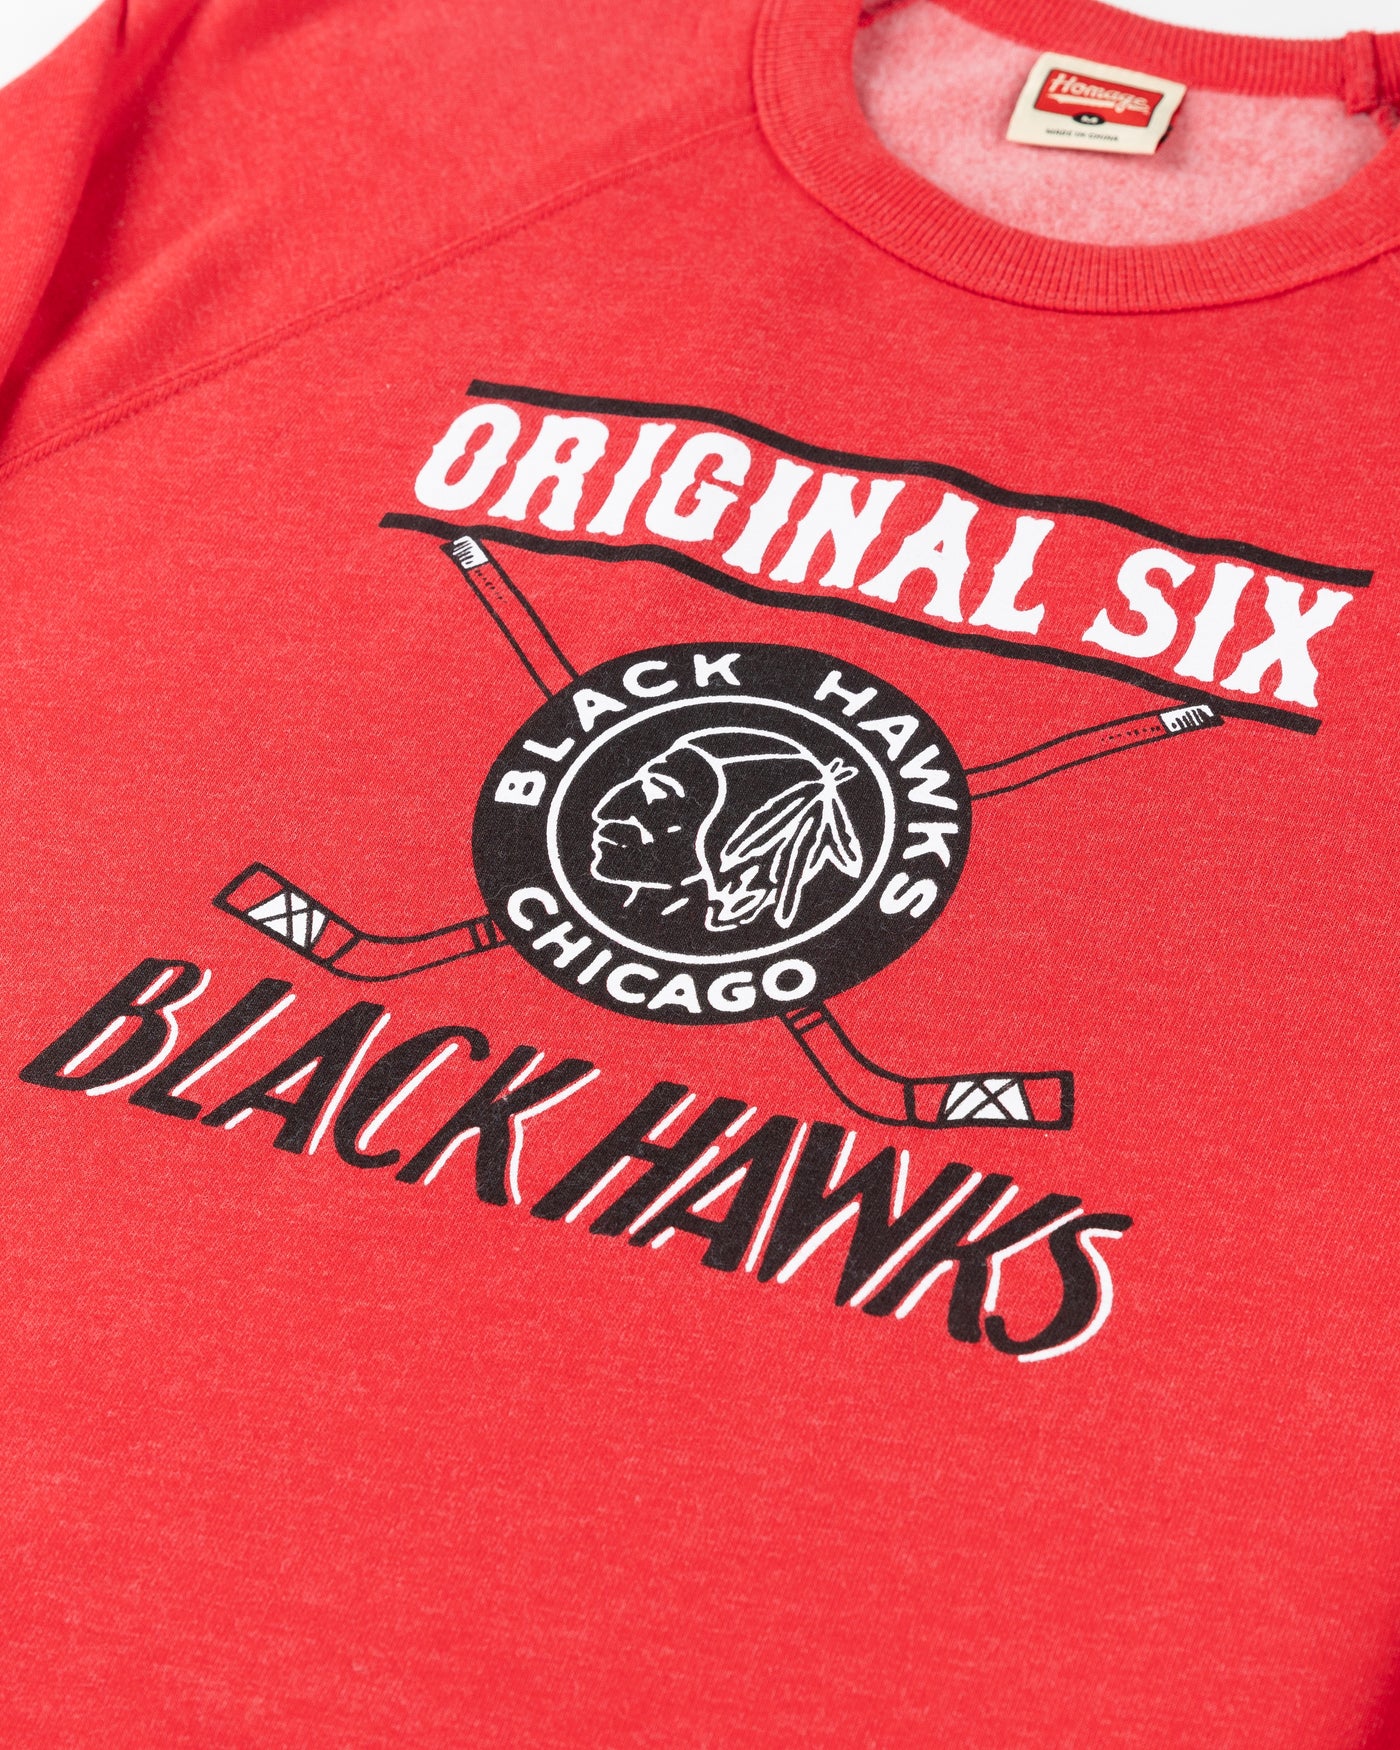 red Homage Chicago Blackhawks crewneck with vintage logo and Original Six wordmark graphic across front - detail lay flat